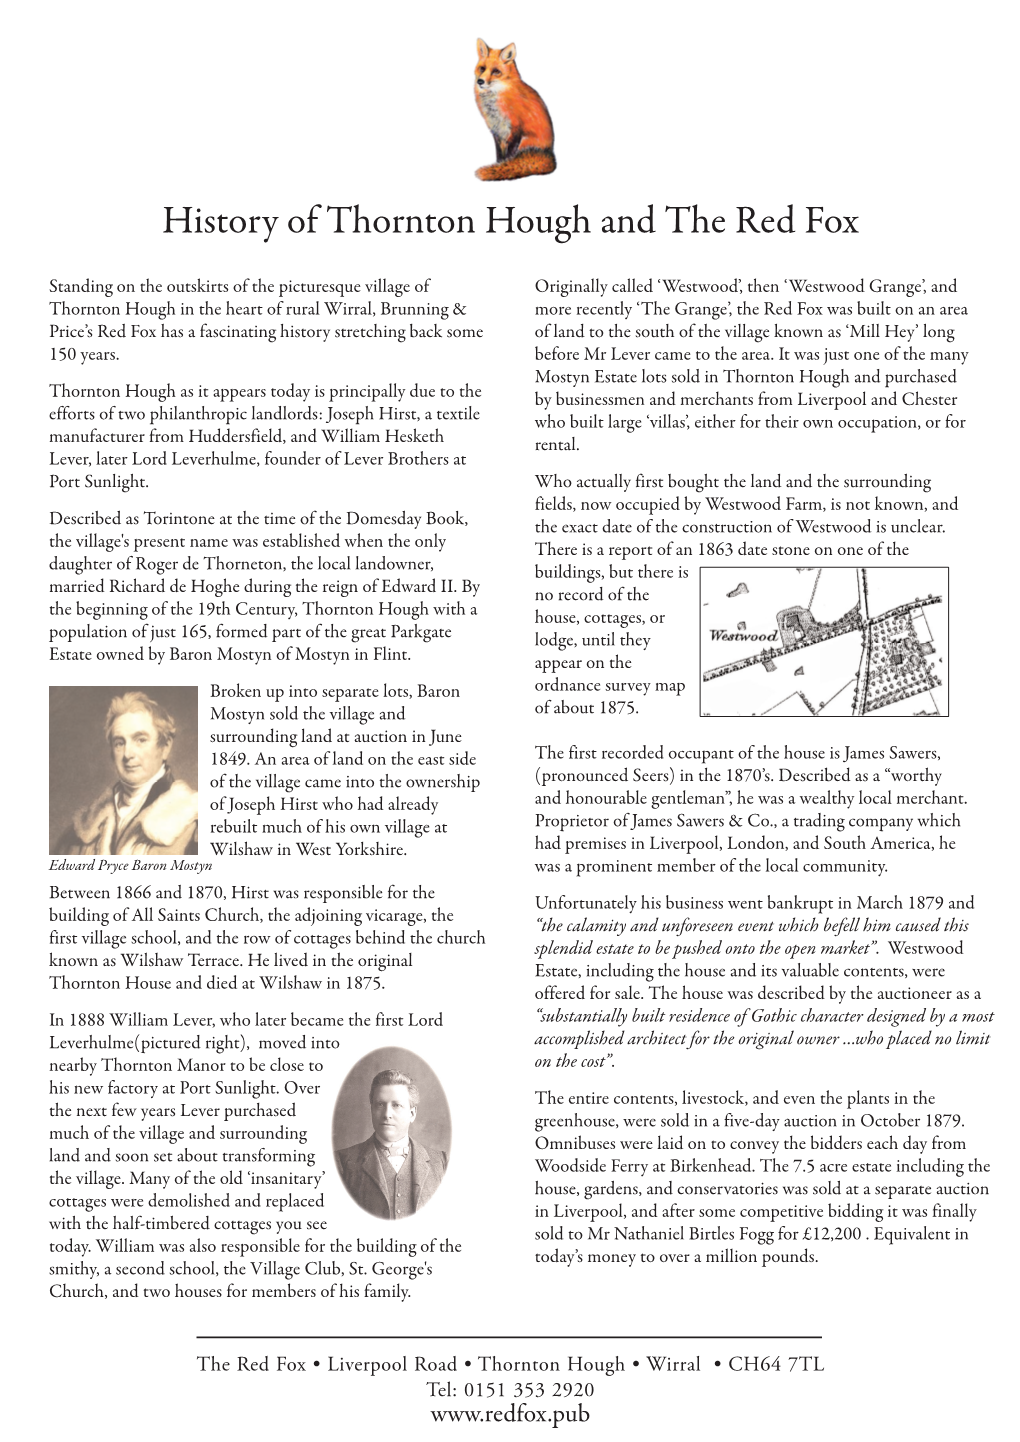 History of Thornton Hough and the Red Fox